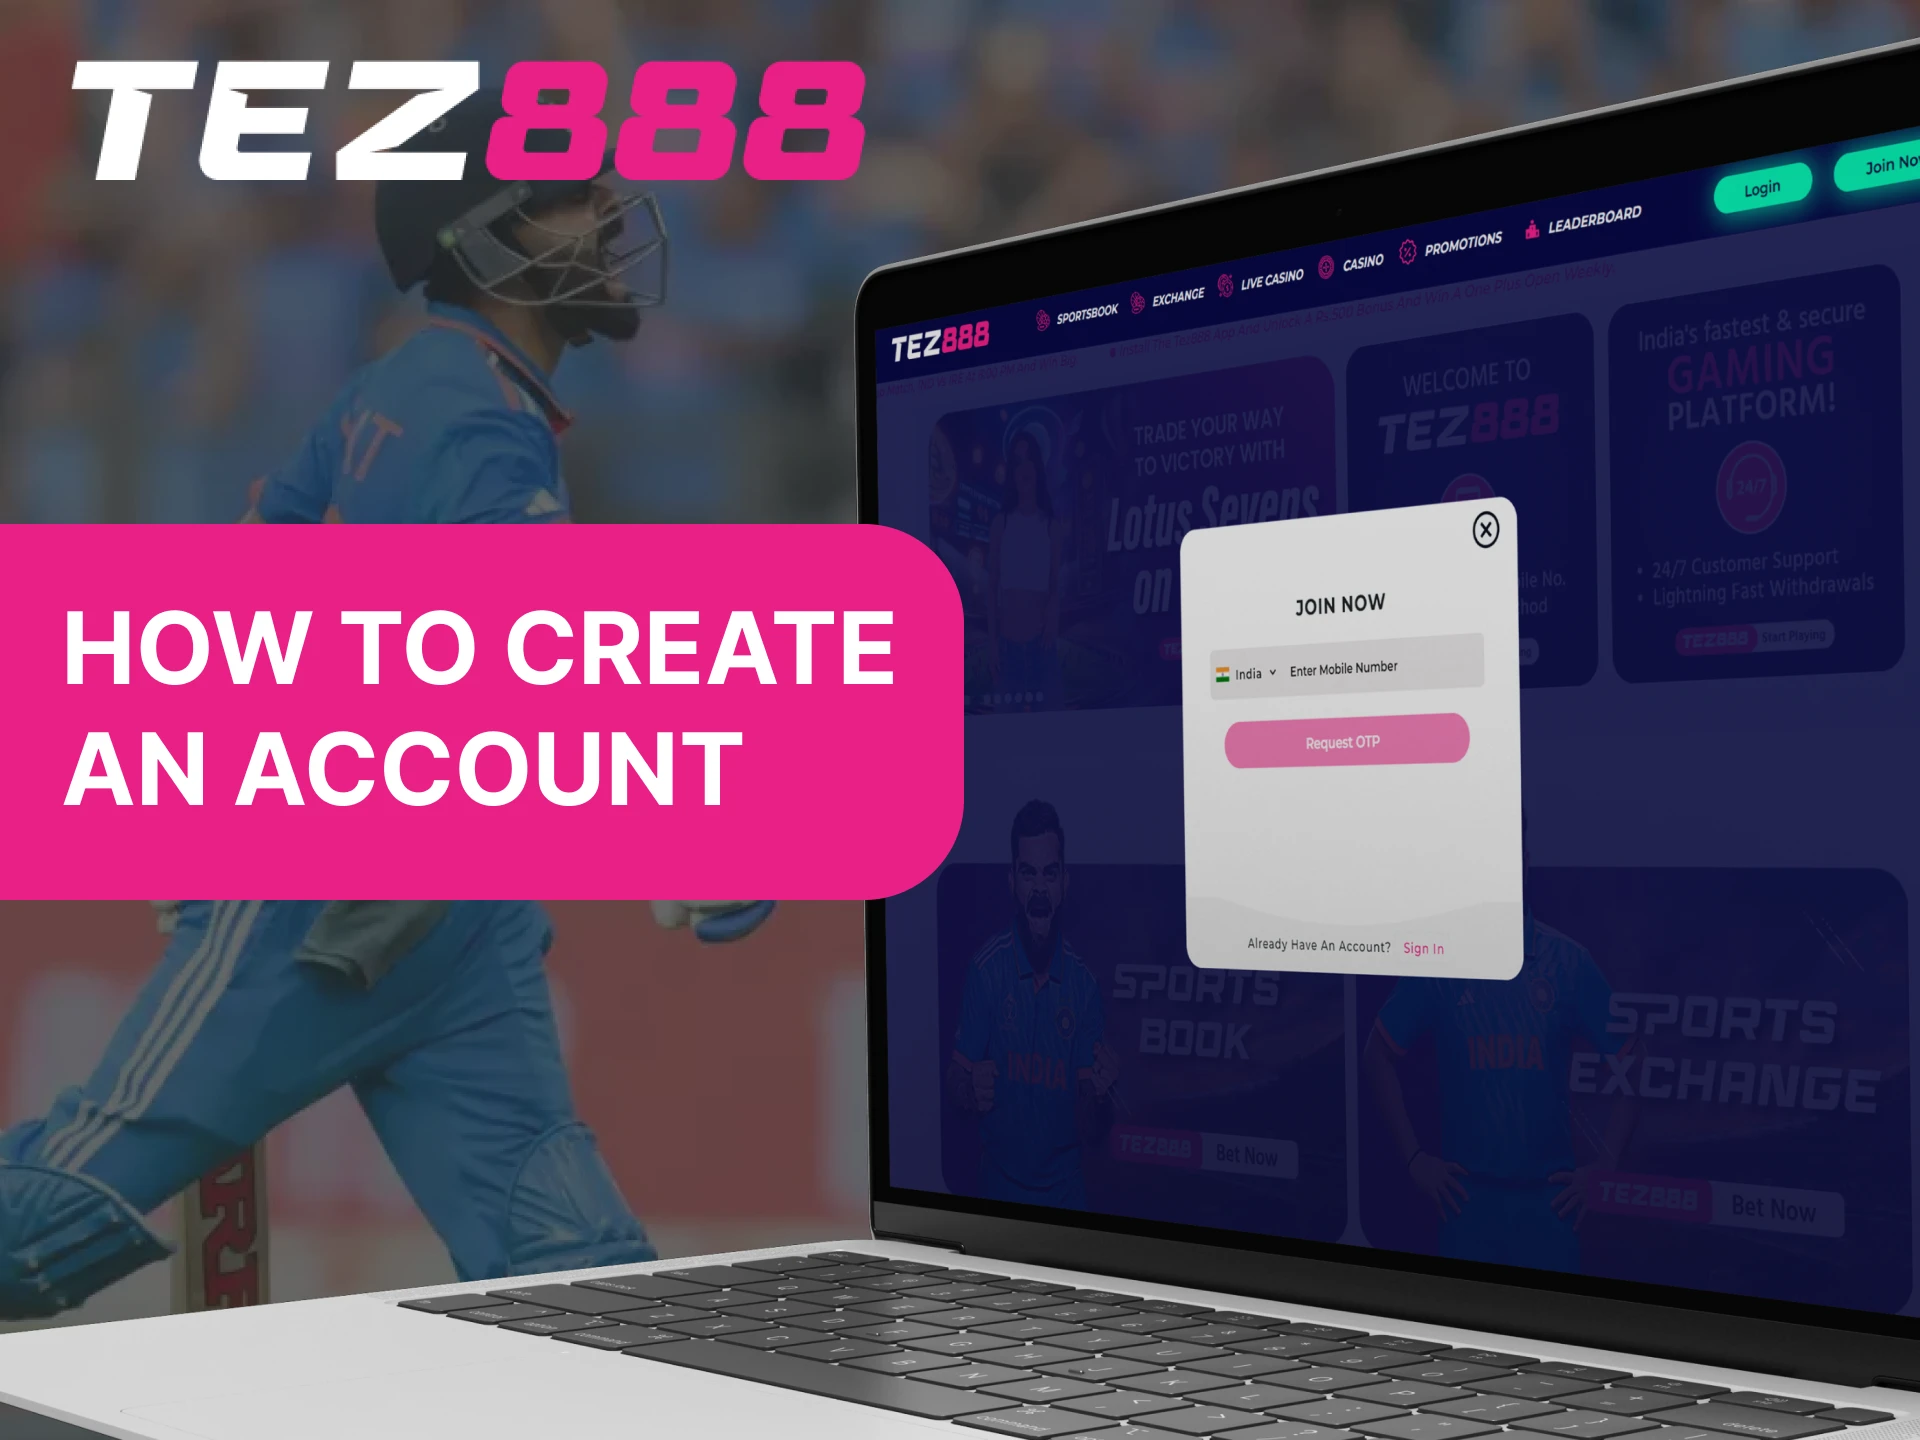 You can register with Tez888 using your phone number.